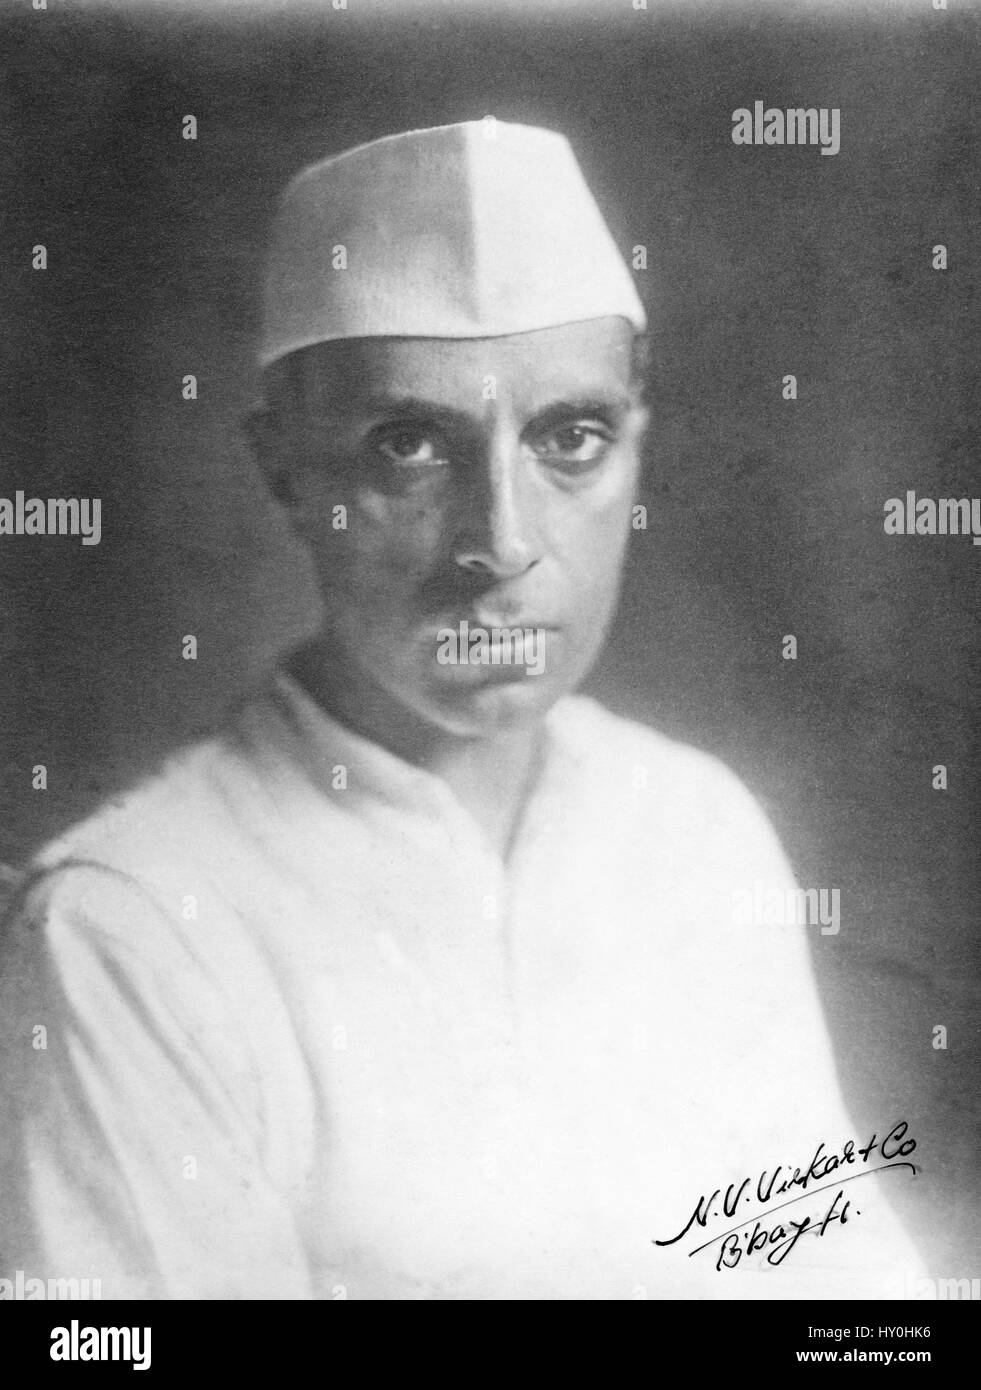 Indian first prime minister, jawaharlal nehru, india, asia, 1927 Stock Photo